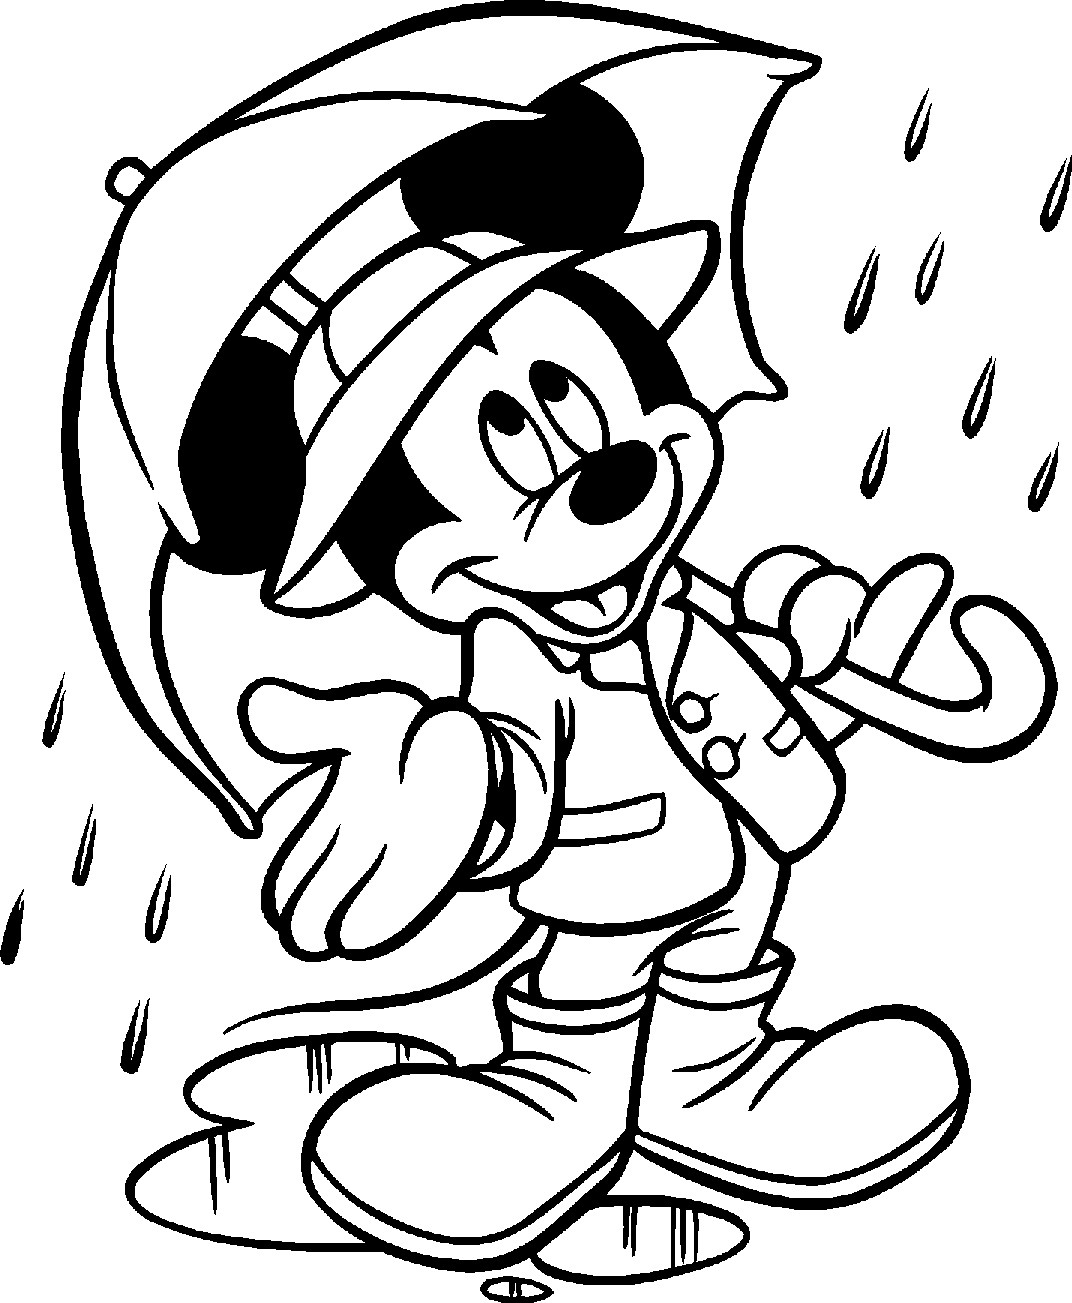 Free Mickey Mouse Coloring Pages
 Free Printable Mickey Mouse Coloring Pages For Kids